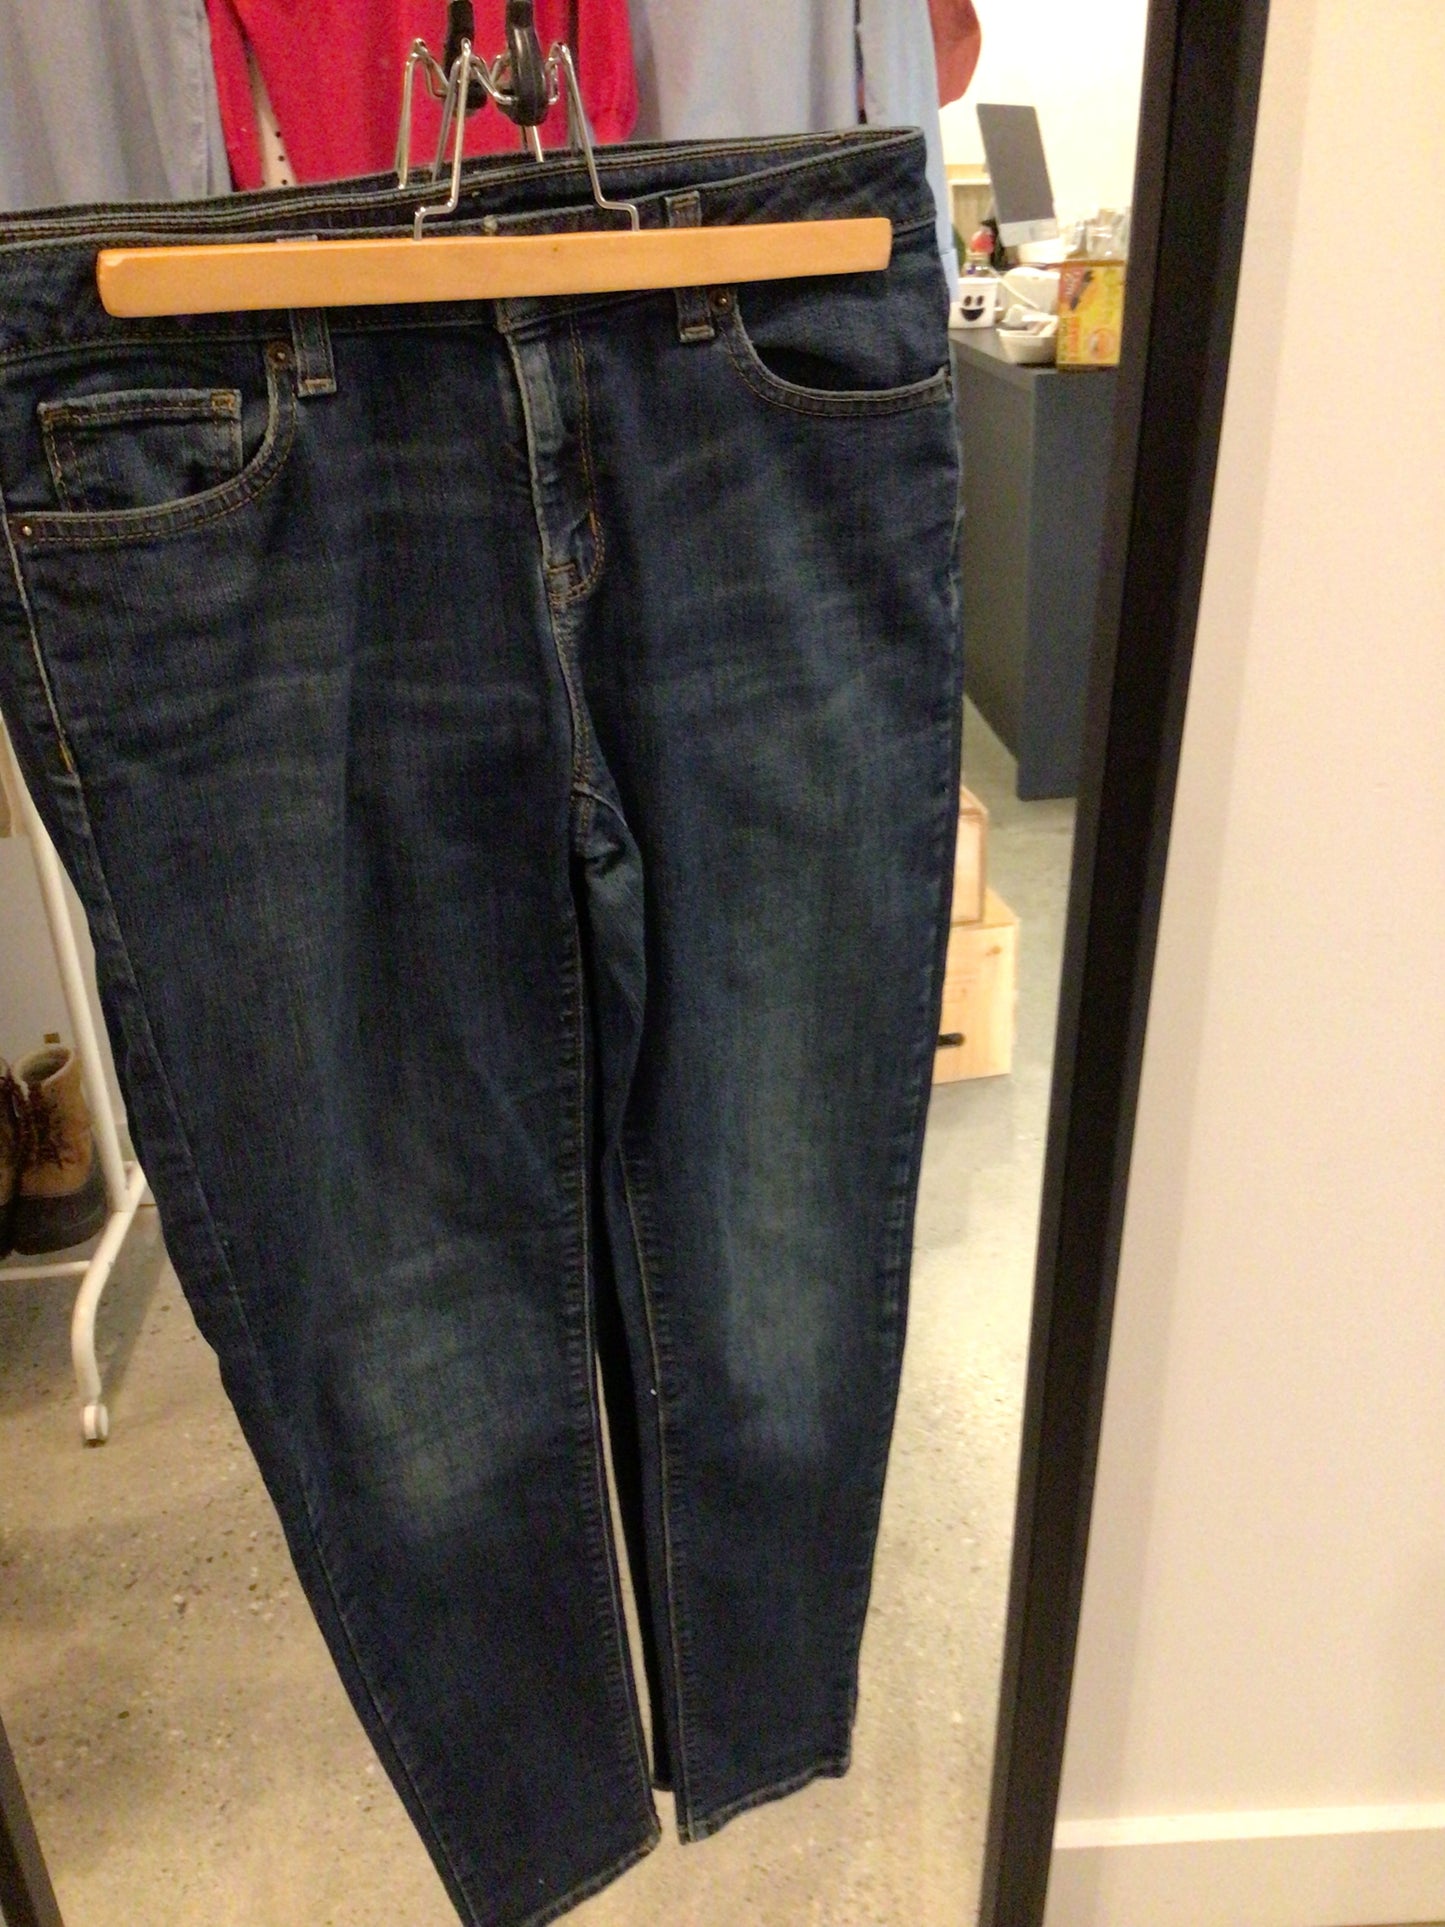 Consignment 1011-06 Michael Kors Jeans size 28